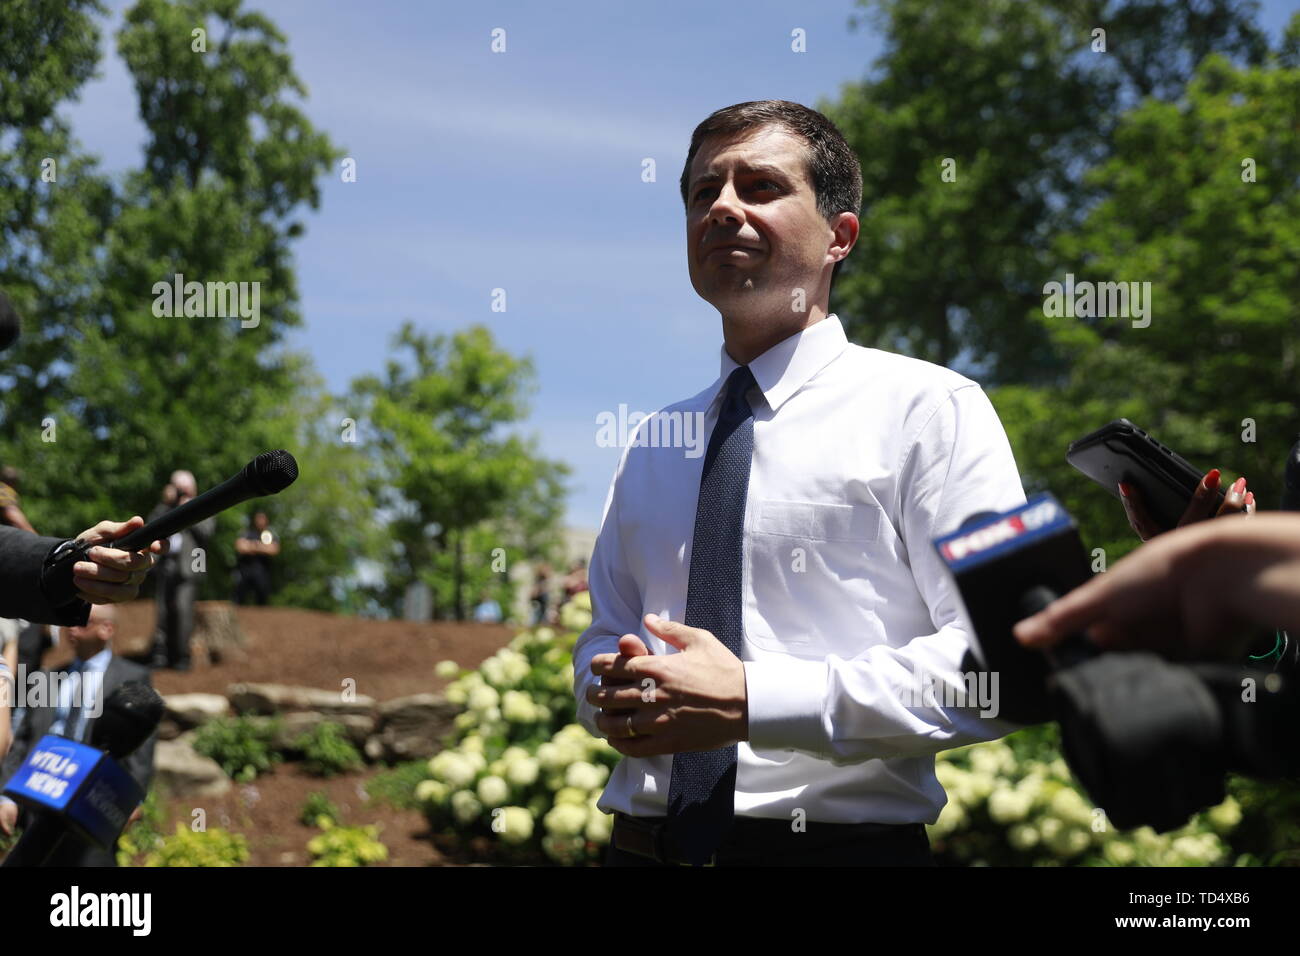 Bloomington, United States. 11th June, 2019. South Bend Mayor Pete Buttigieg, who is running for the Democratic nomination for President of the United States answers question during a press gaggle after delivering an hour long speech on foreign policy and security at the Indiana University Auditorium in Bloomington. Credit: SOPA Images Limited/Alamy Live News Stock Photo